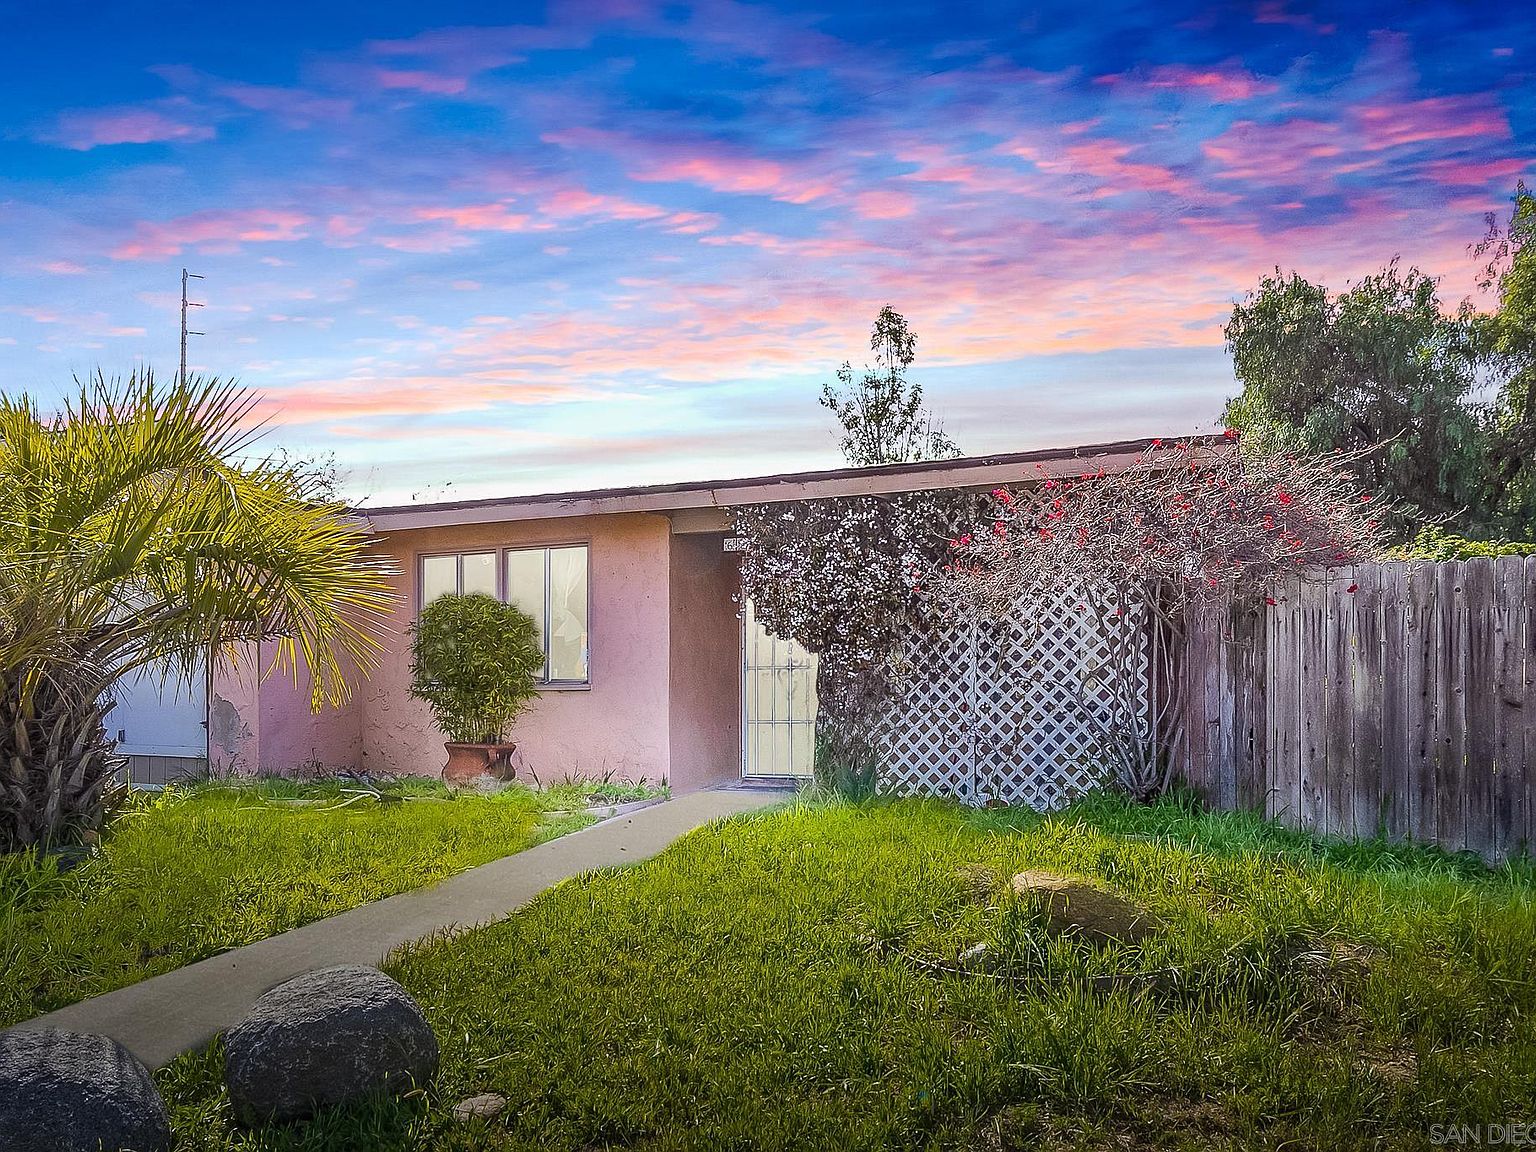 6351 Streamview Dr, San Diego, CA 92115 | MLS #230006704 | Zillow